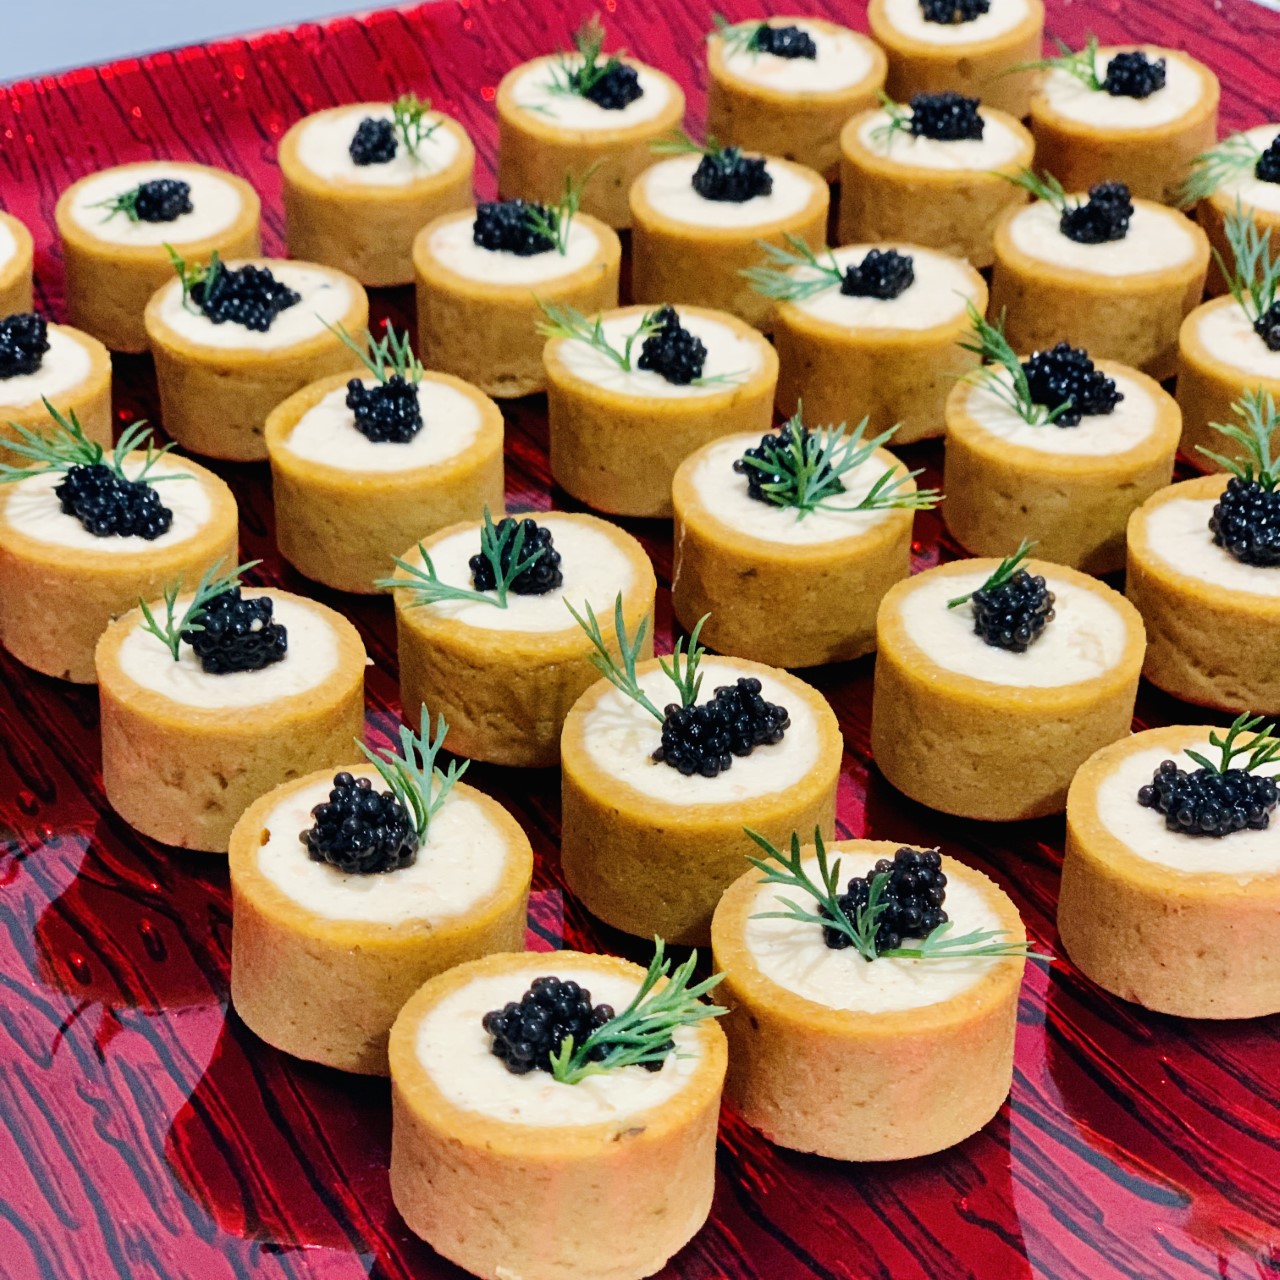 whiskey-salmon-mousse-with-caviar.jpg